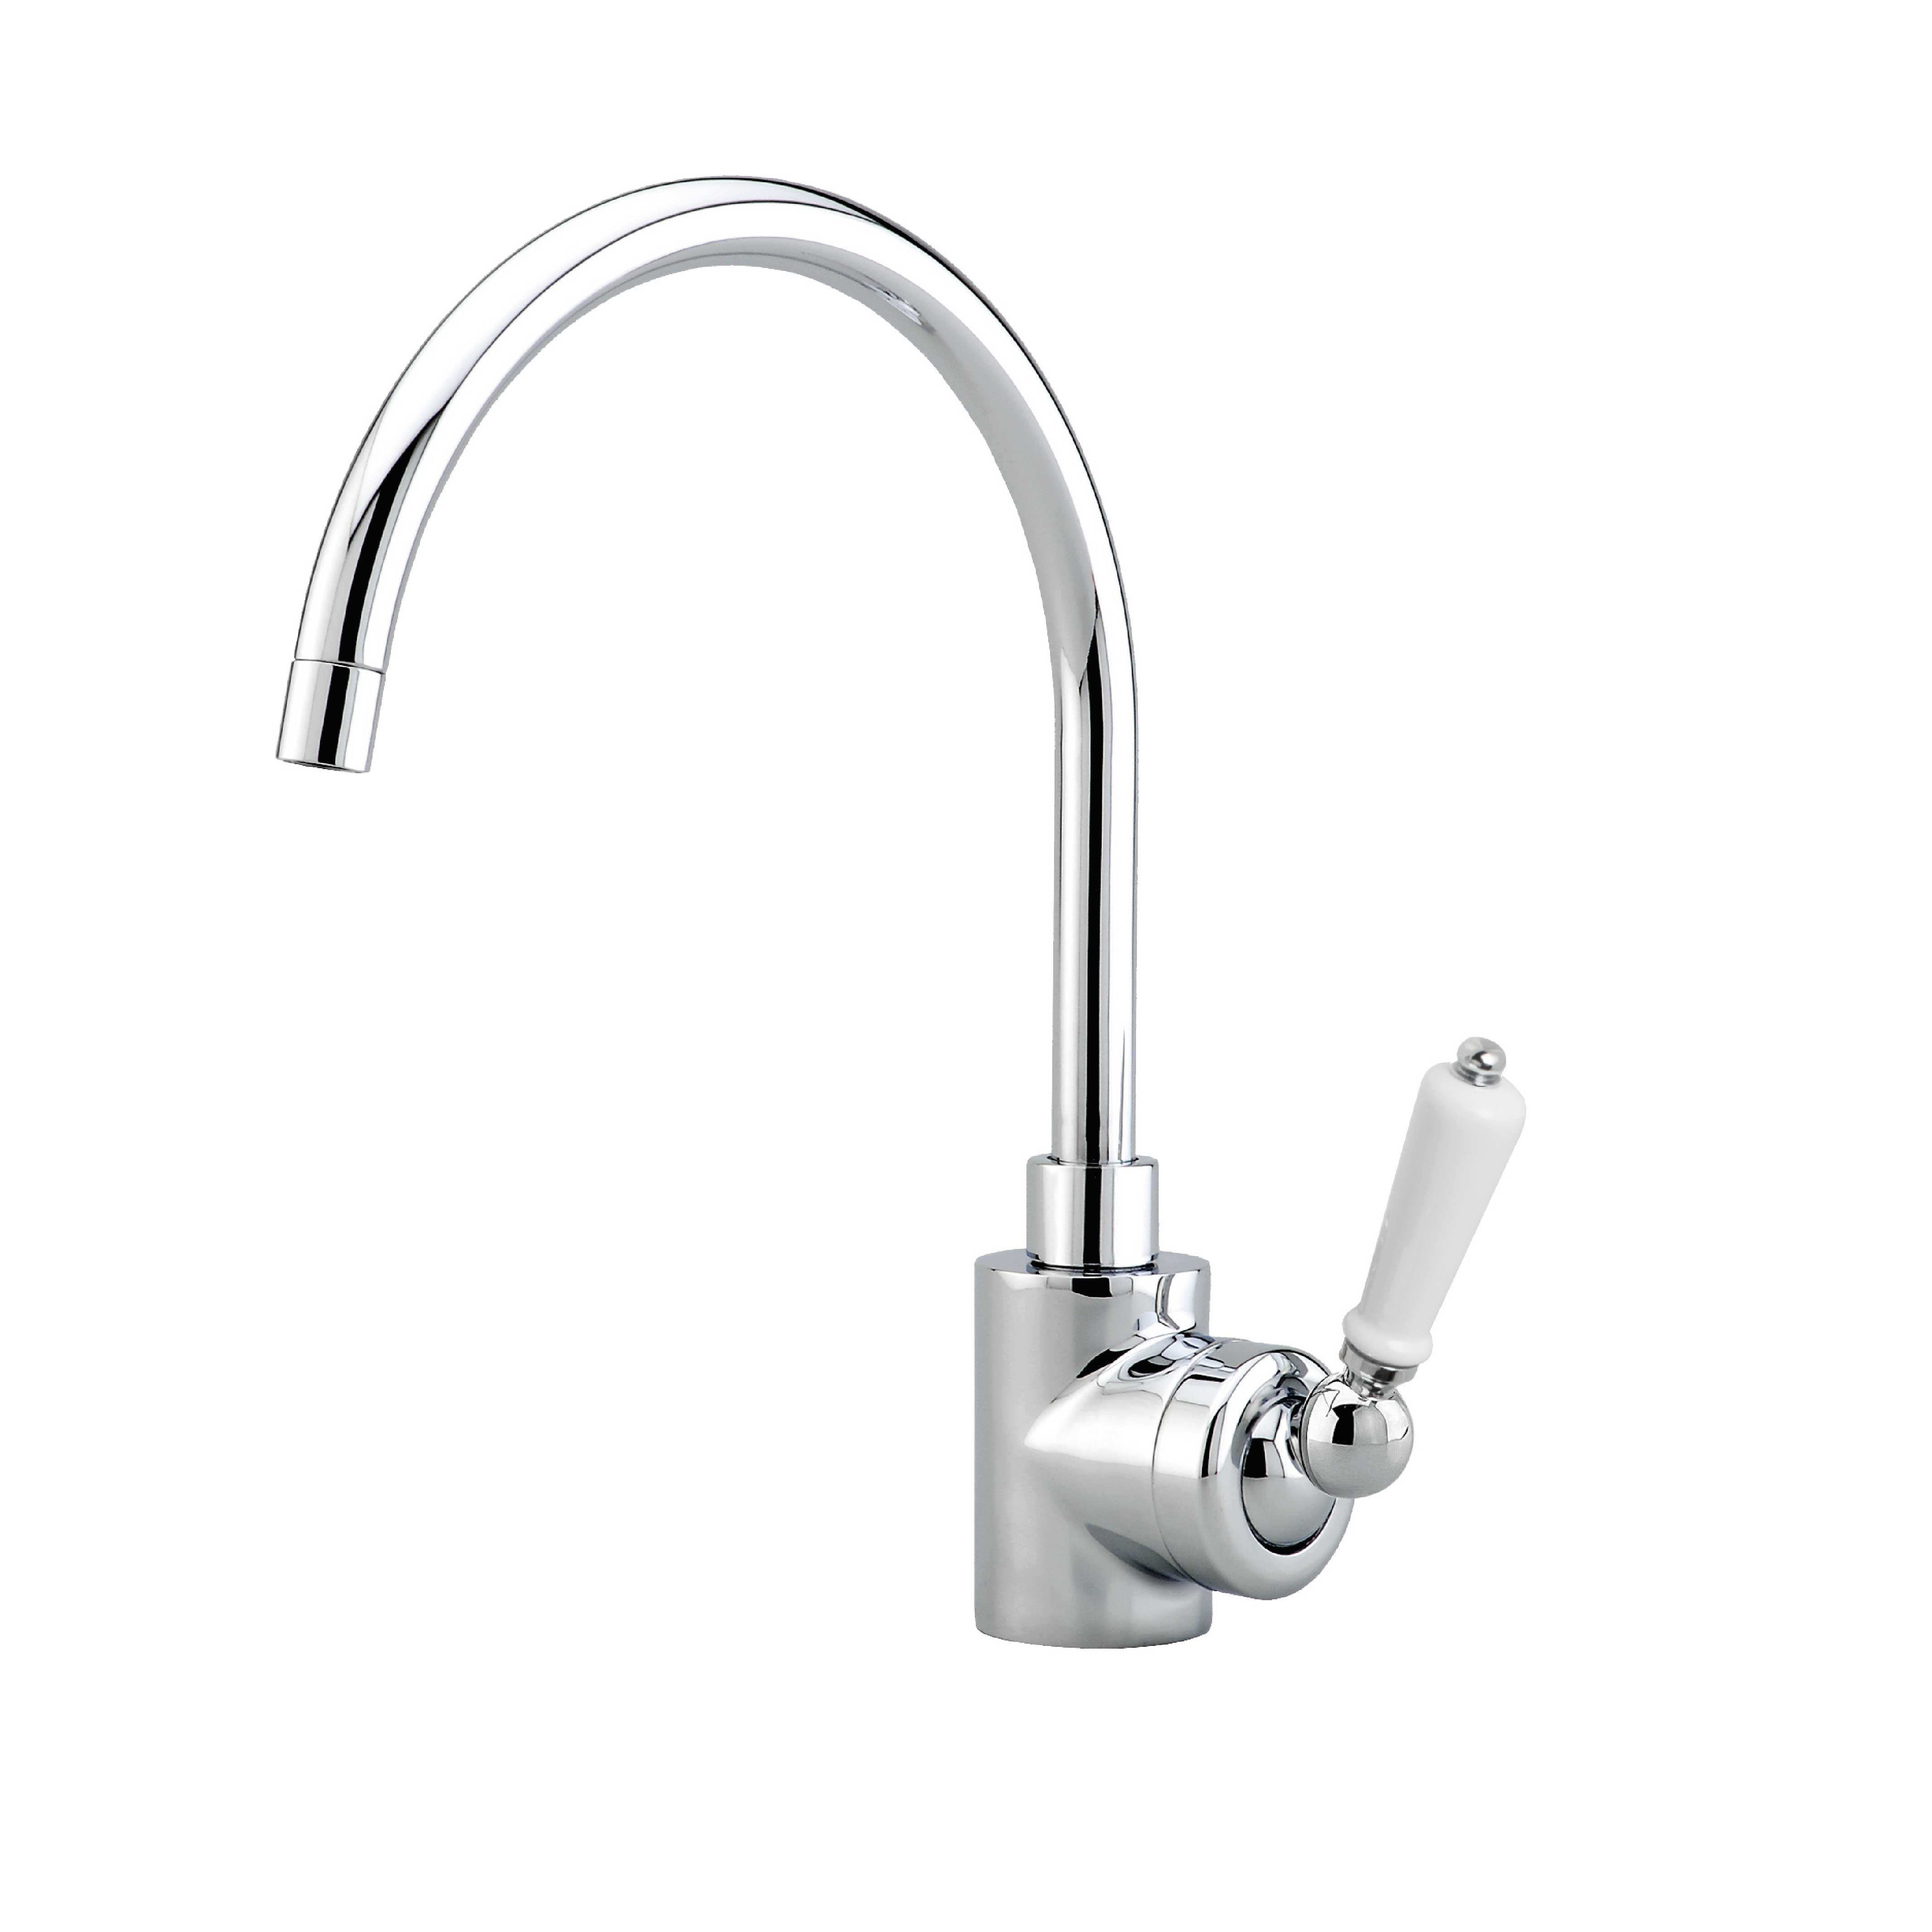 MKC-1BY6 Single-hole lever kitchen mixer